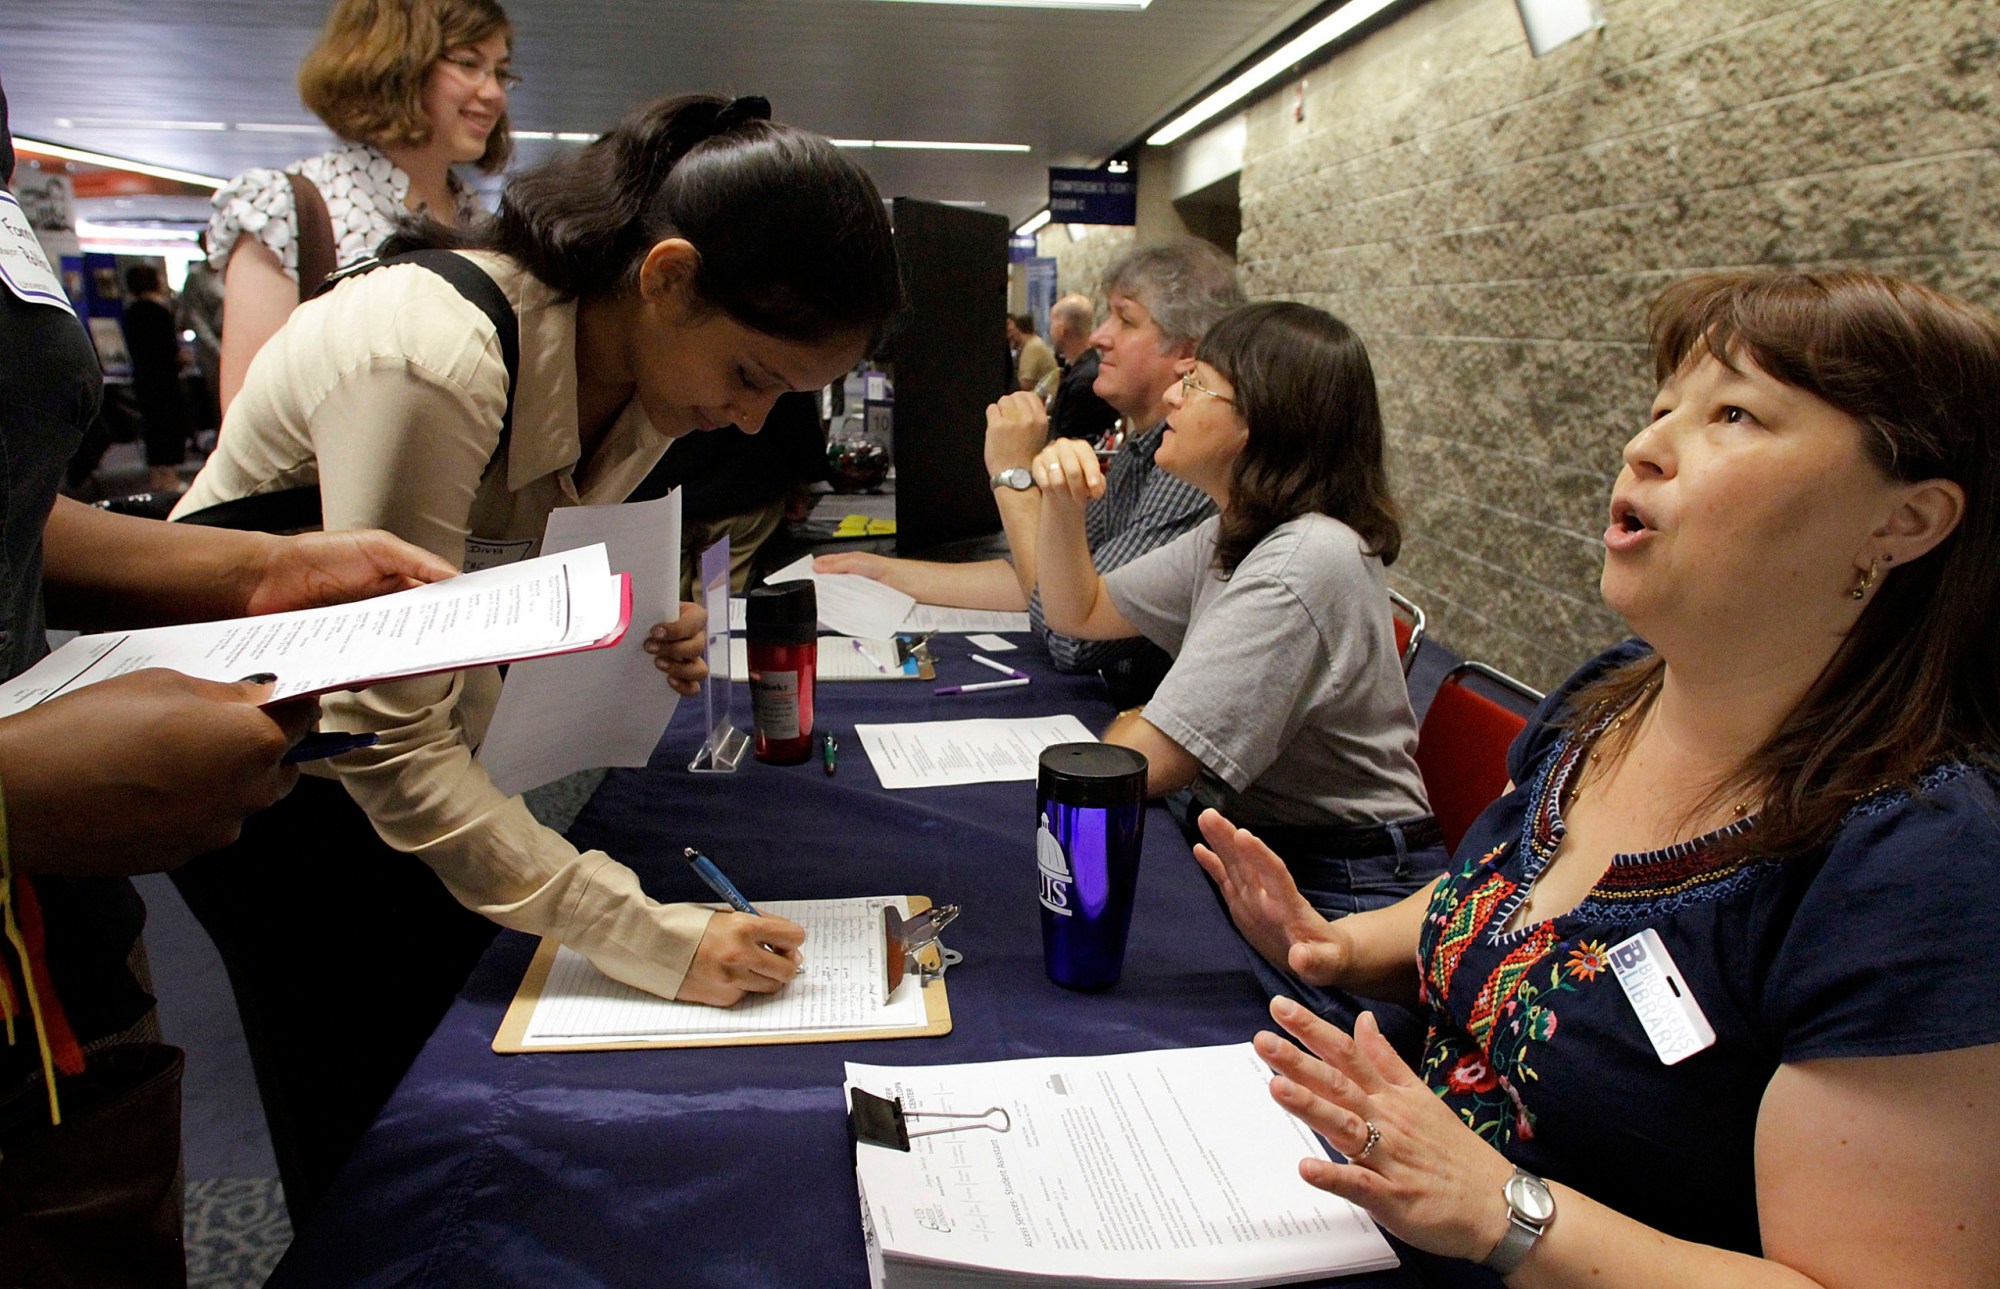 Gloria Newton Davlantis speaks with students seeking employment during a University of Illinois Job Fair in Springfield, Illinois. Higher Education based on credit hours in the United States often leave graduate unprepared for jobs. (AP/Seth Perlman)